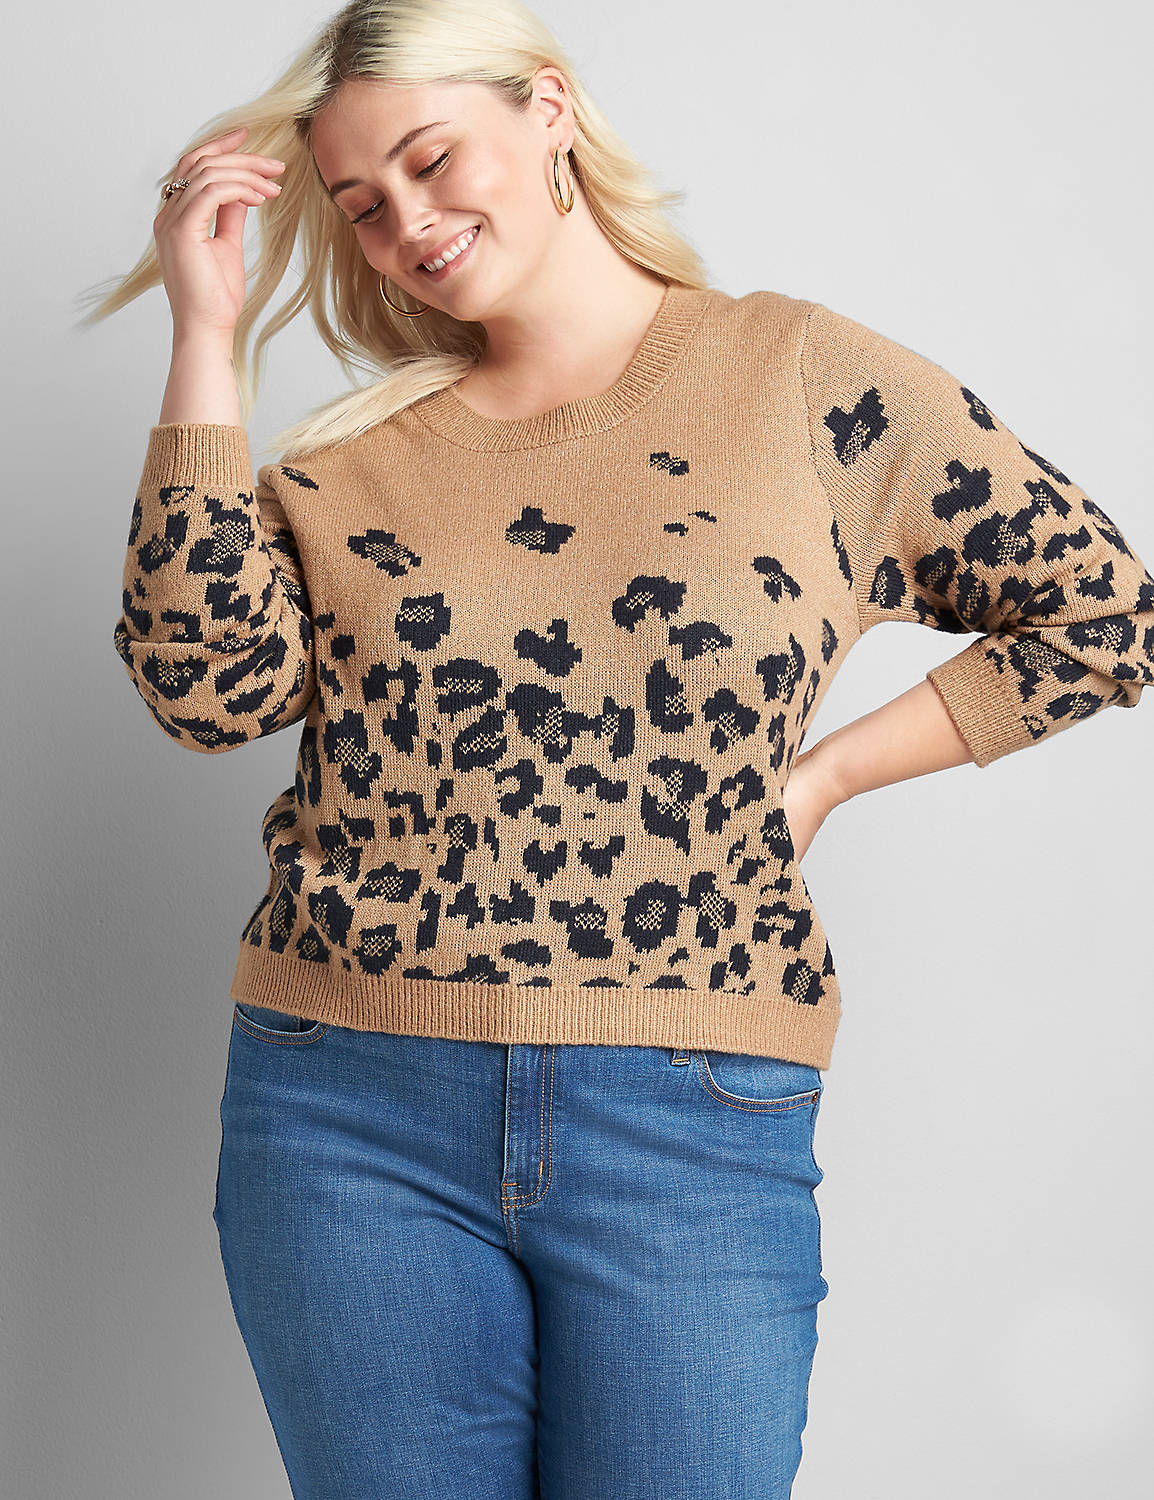 Cropped Leopard Sweater Product Image 1